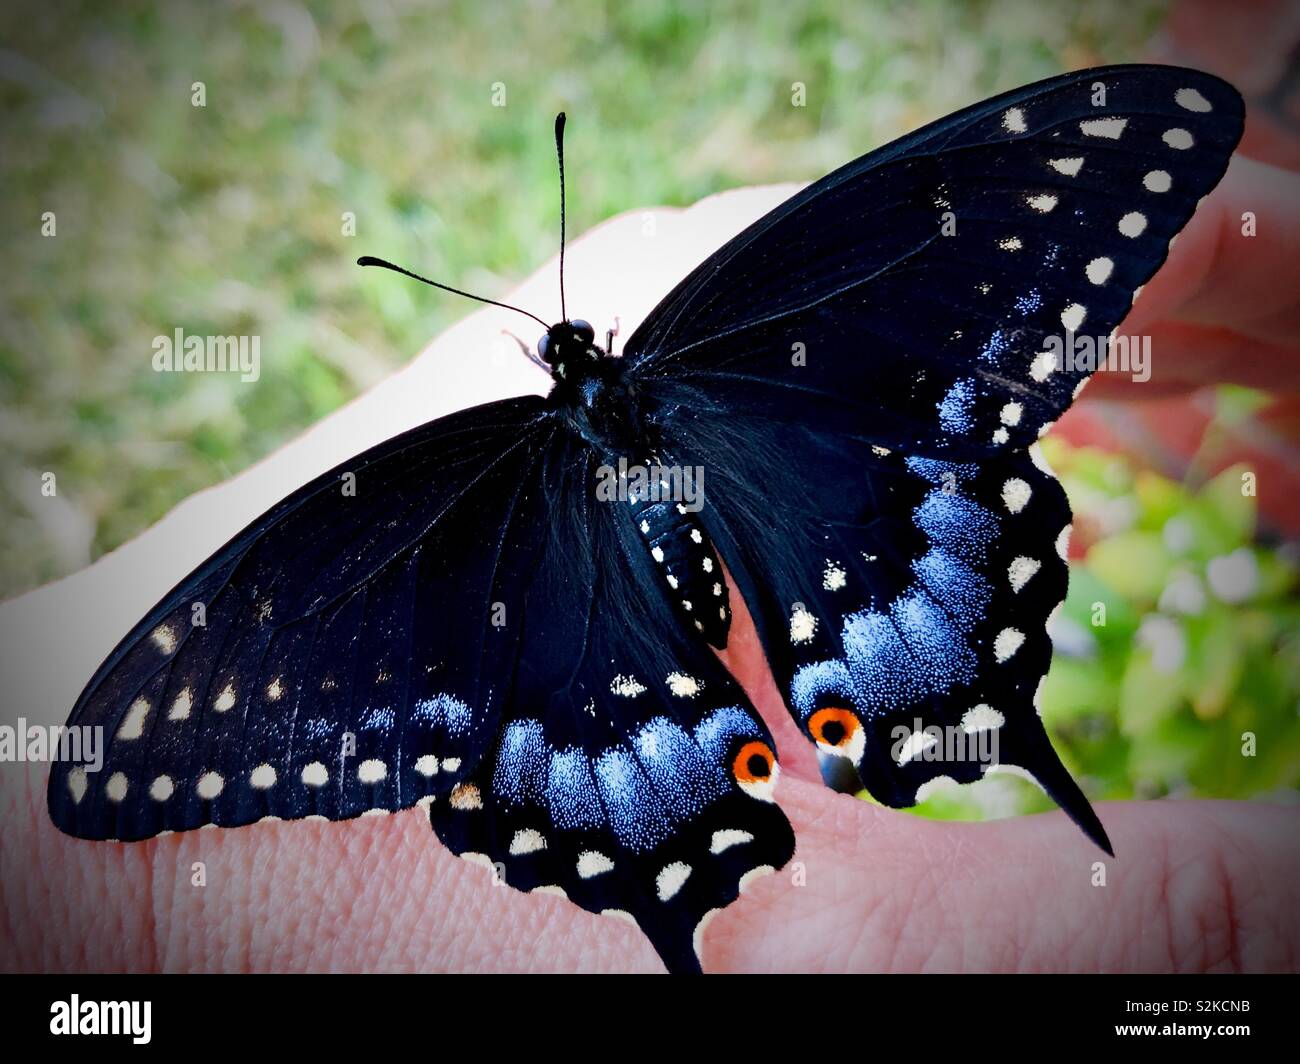 Female black swallowtail butterfly on a woman’s hand Stock Photo